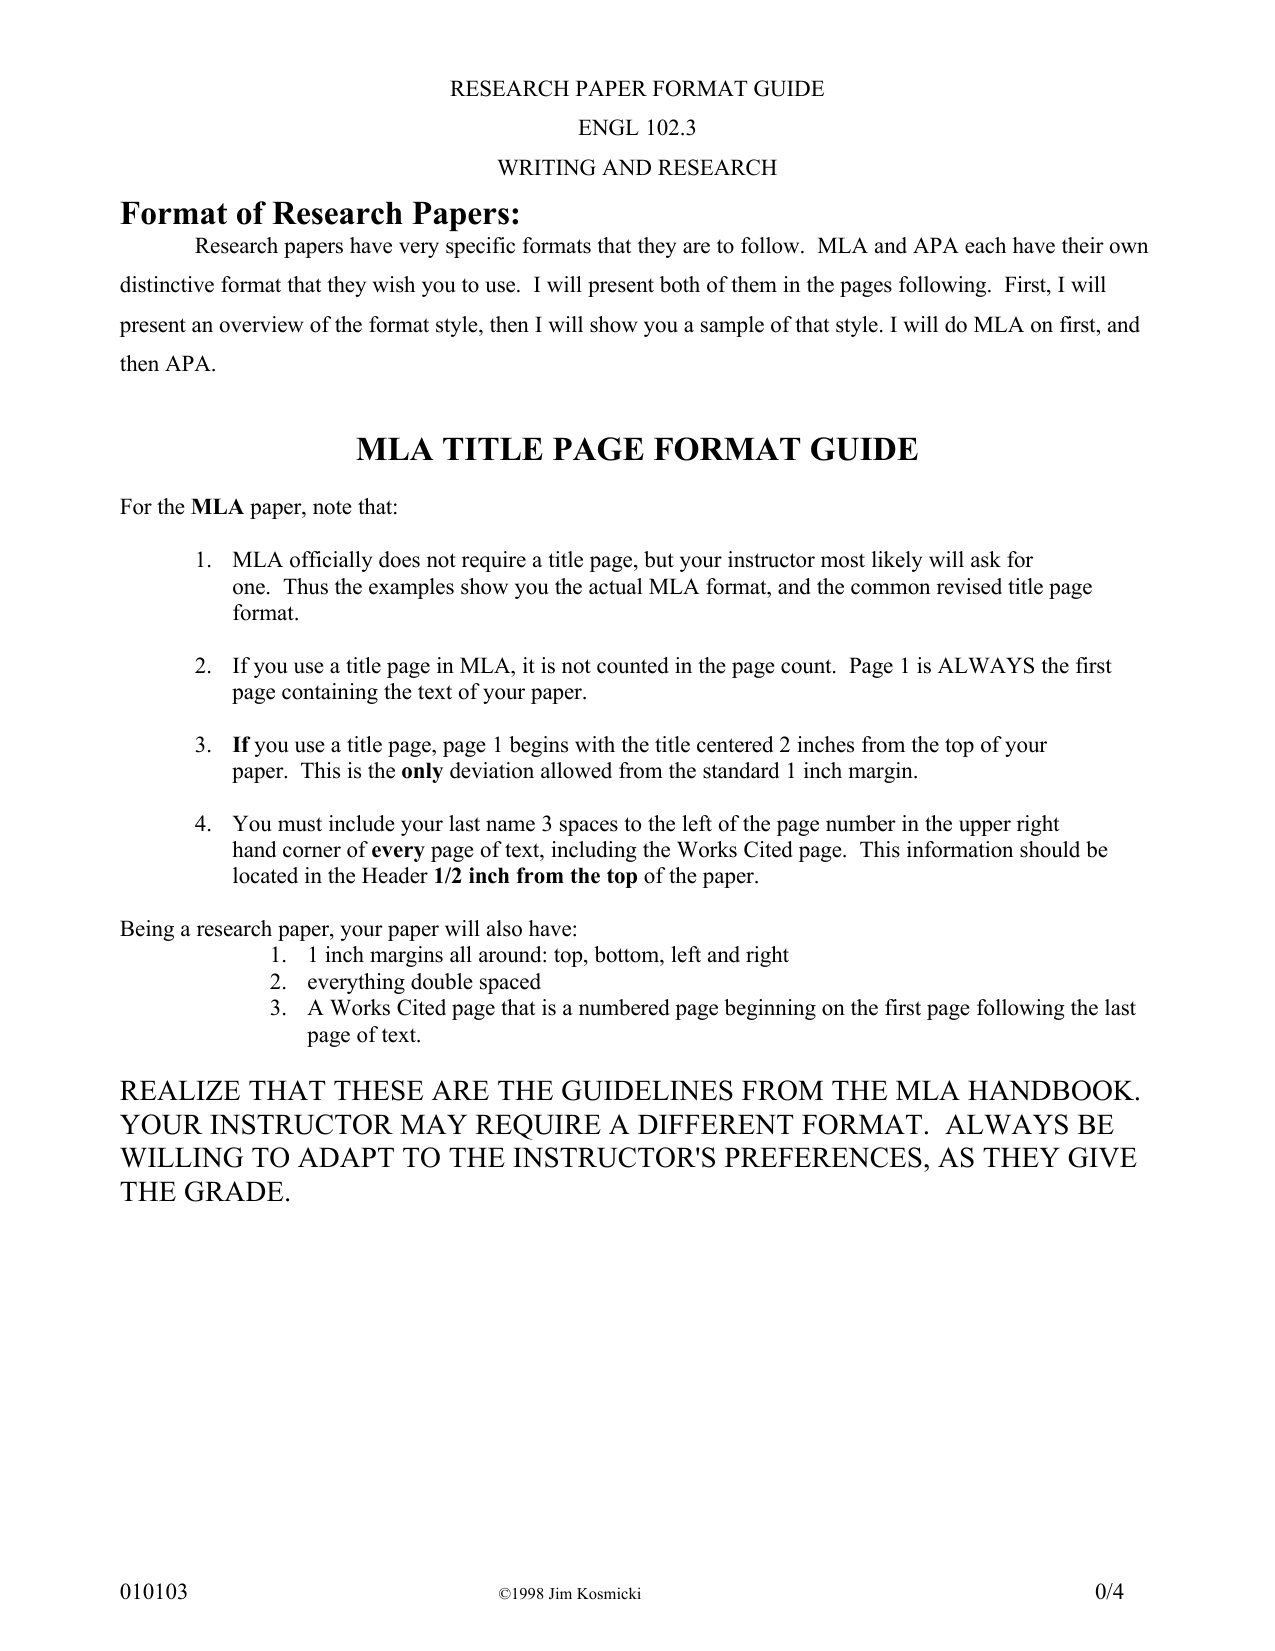 examples of research papers mla format